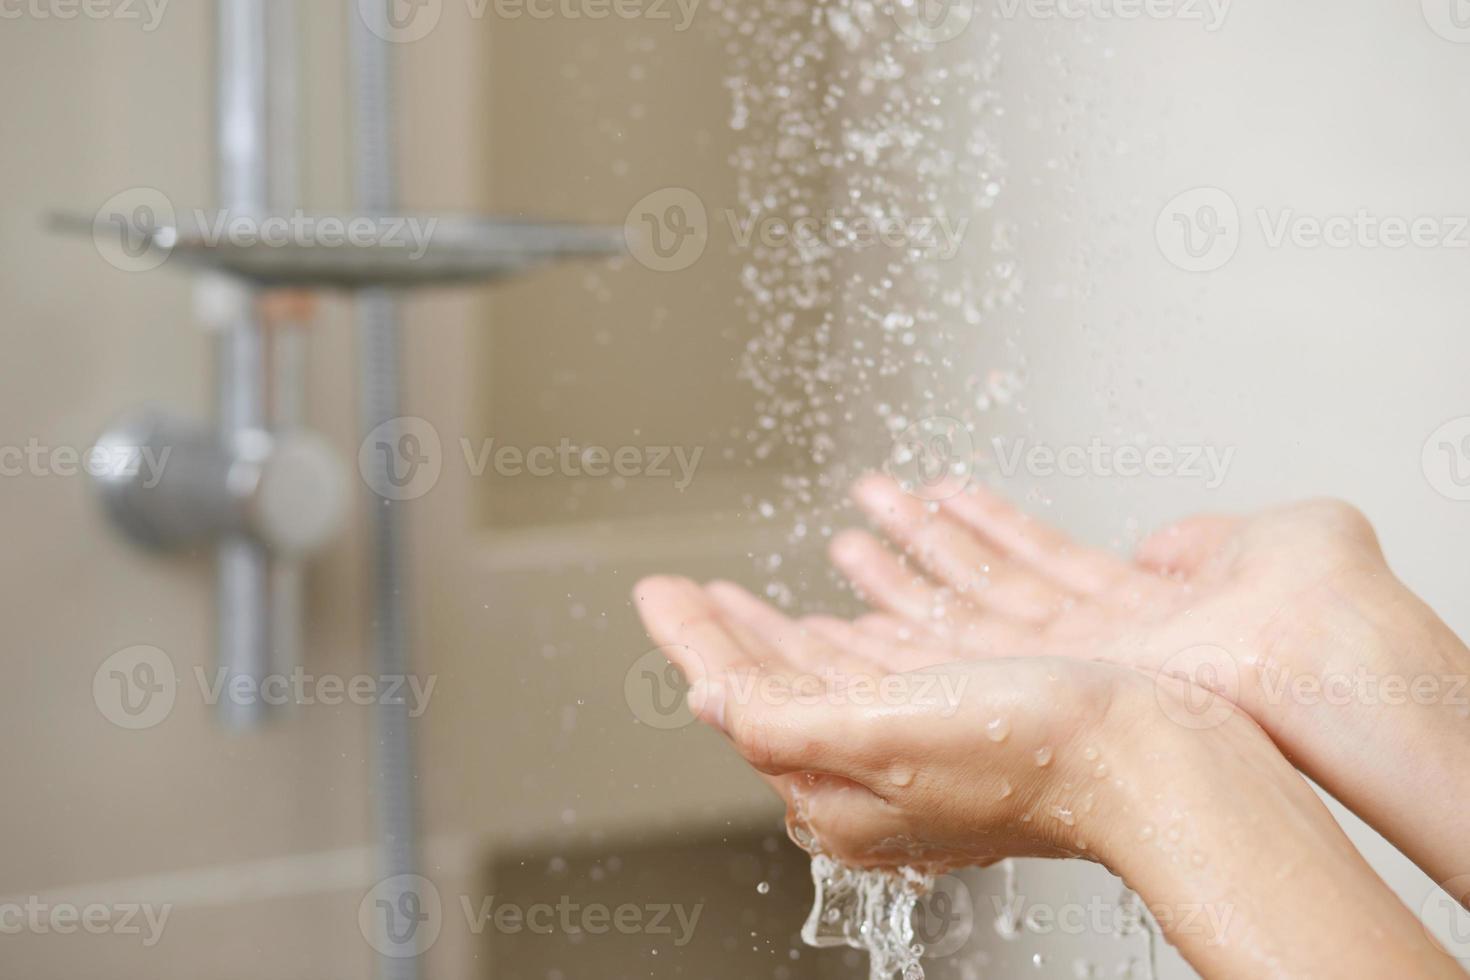 A woman uses hand to measure the water temperature from a water heater before taking a shower photo